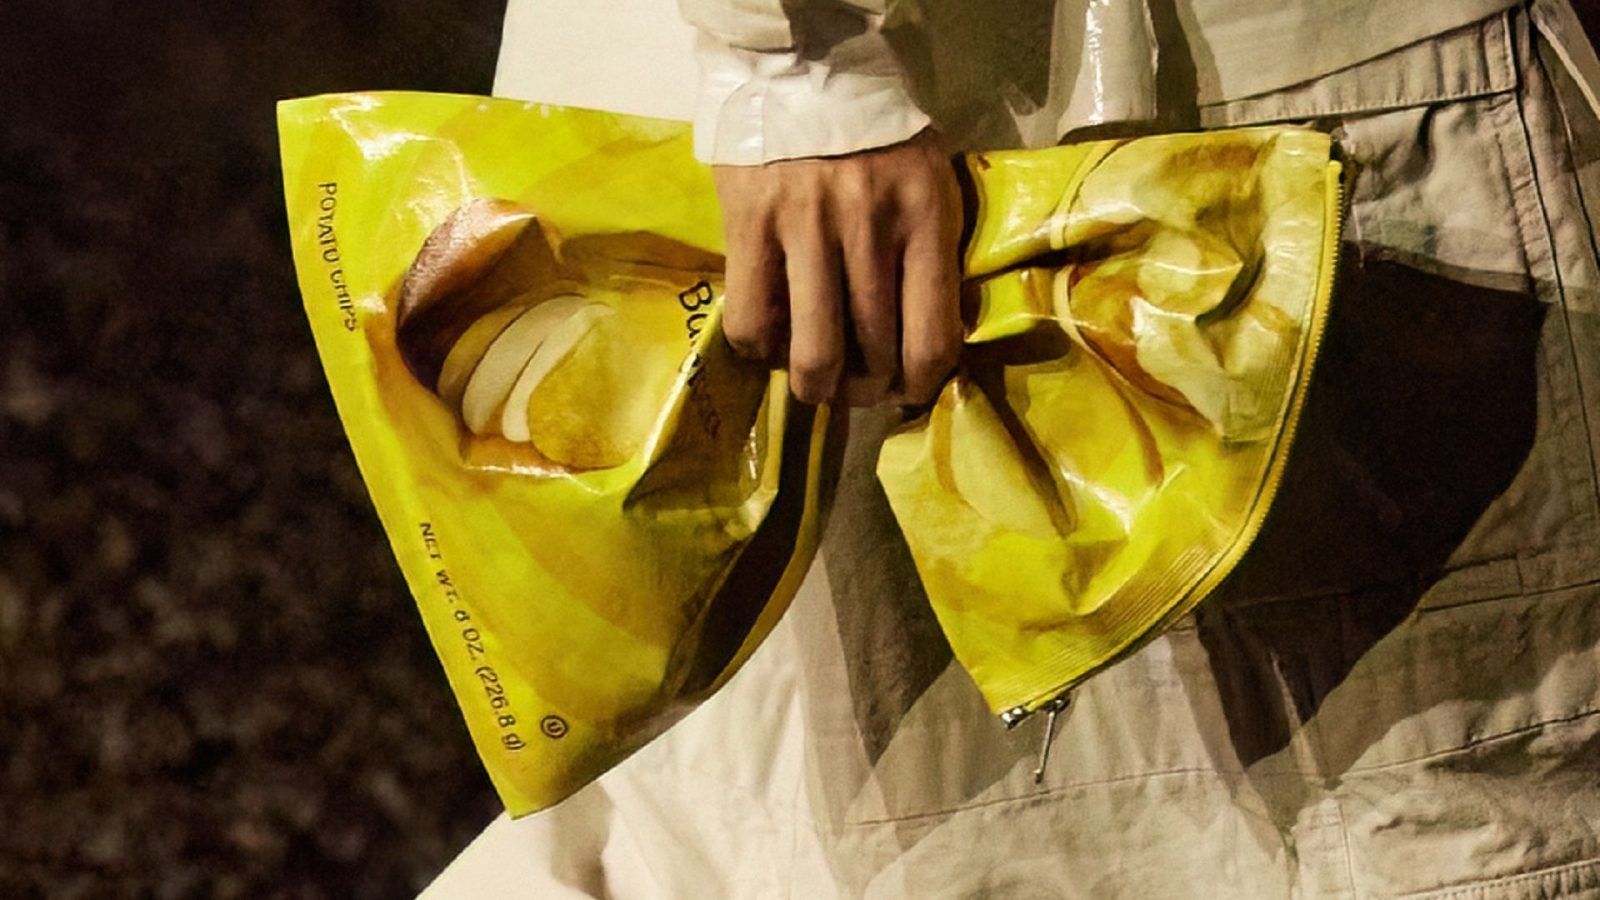 Balenciaga Trash Pouch inspired by garbage bag is up for sale